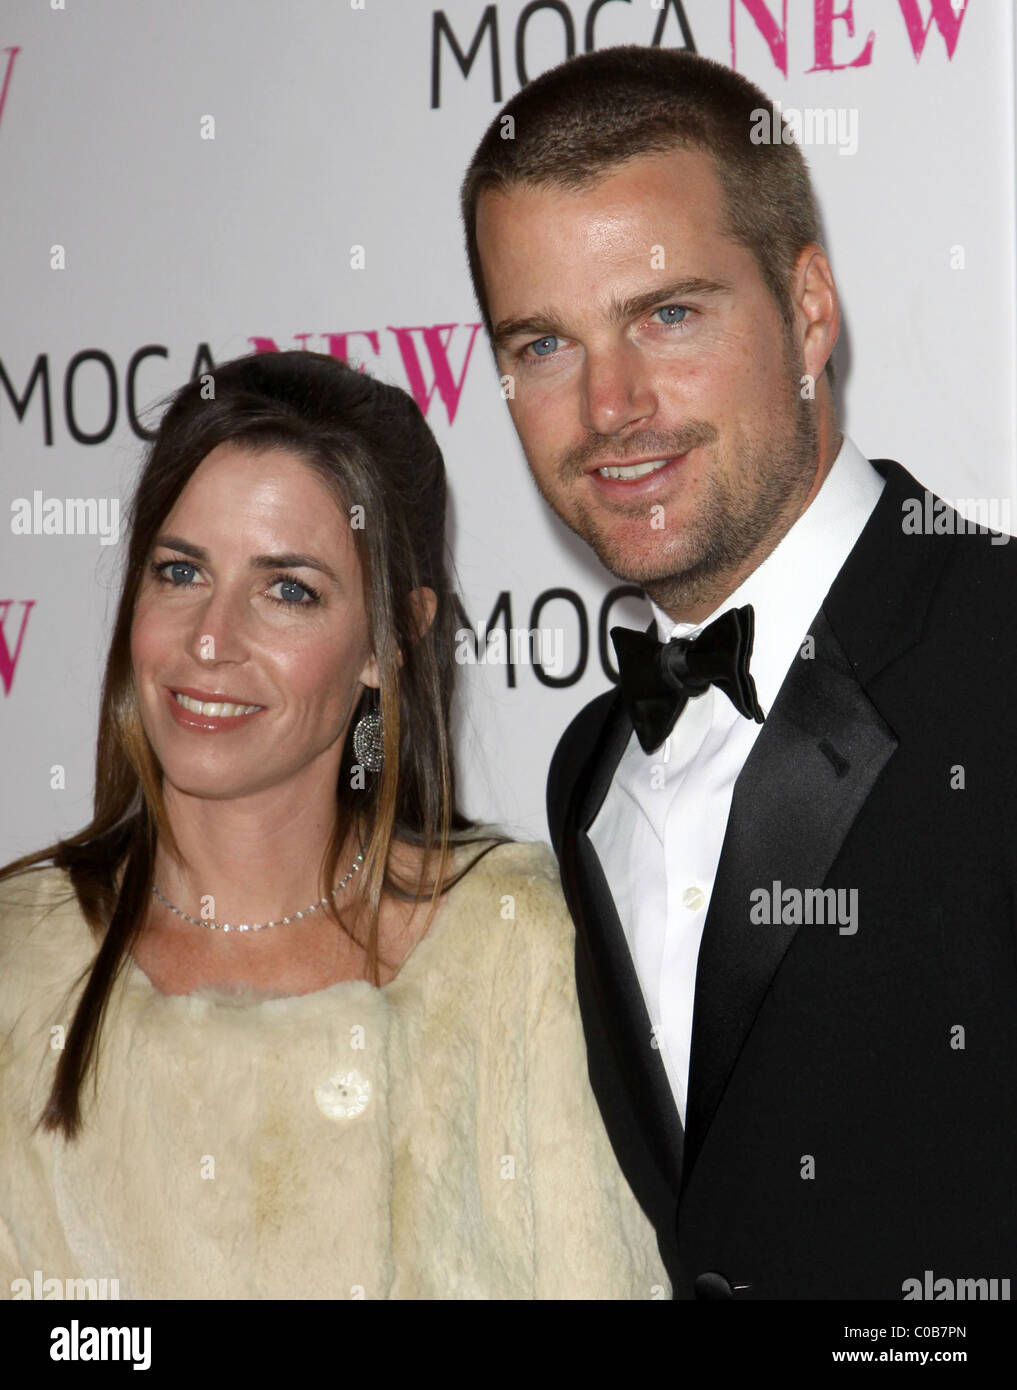 Chris O Donnell And Wife Caroline O Donnell Moca New 30th Anniversary Gala Arrivals Los